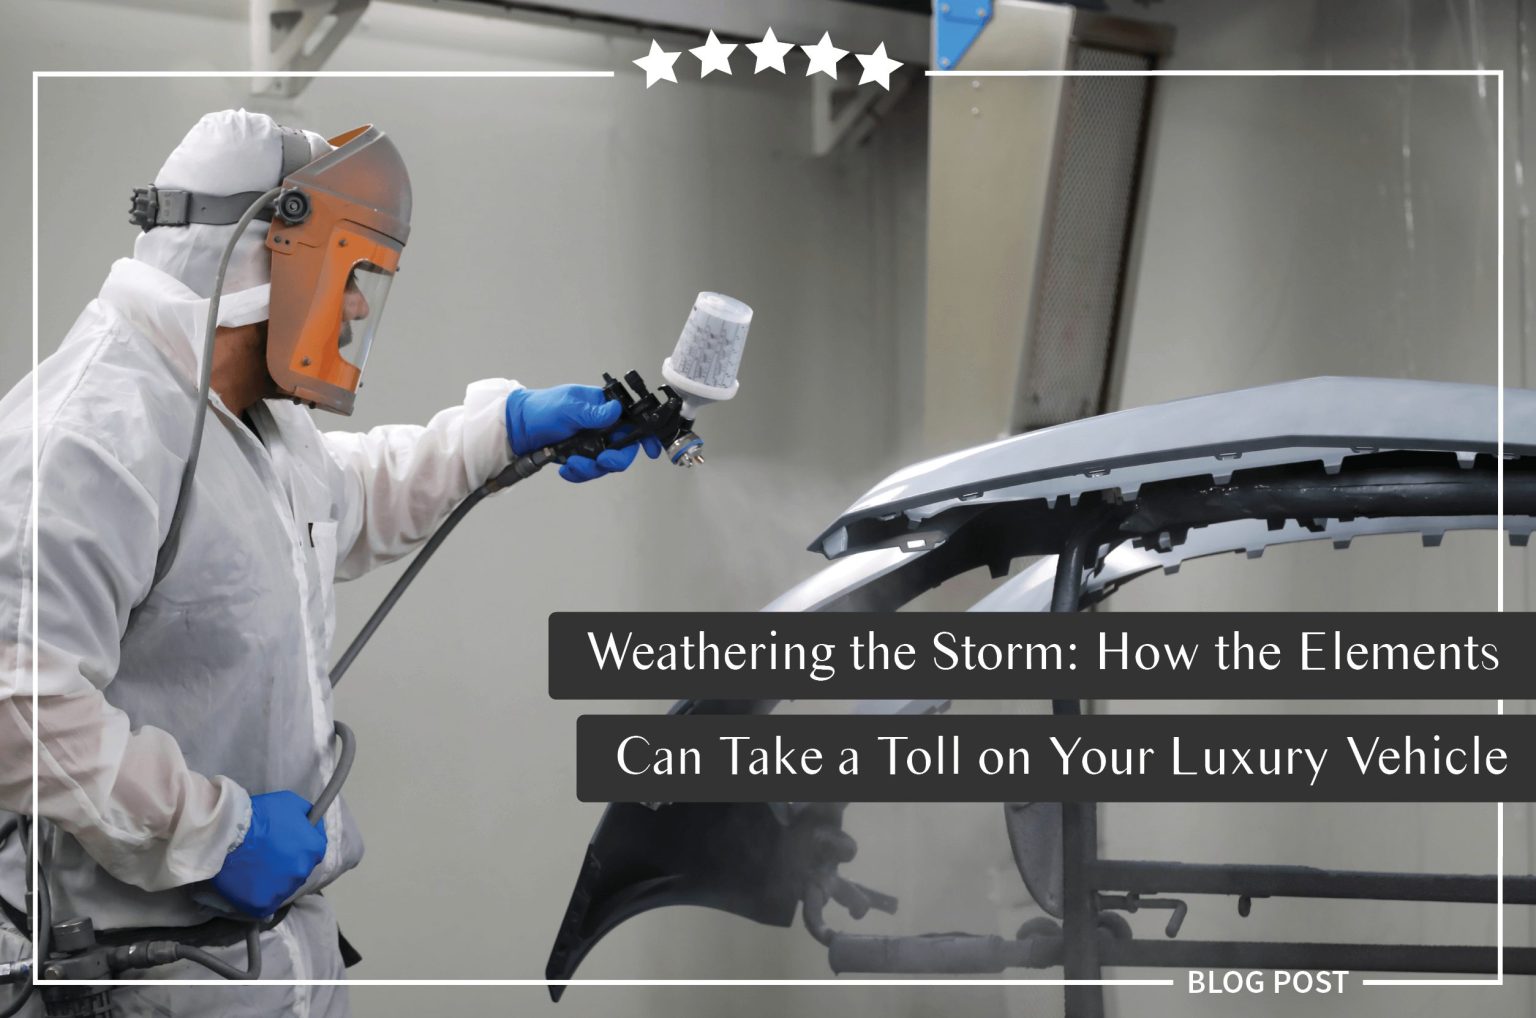 Weathering the Storm: How the Elements Can Take a Toll on Your Luxury Vehicle